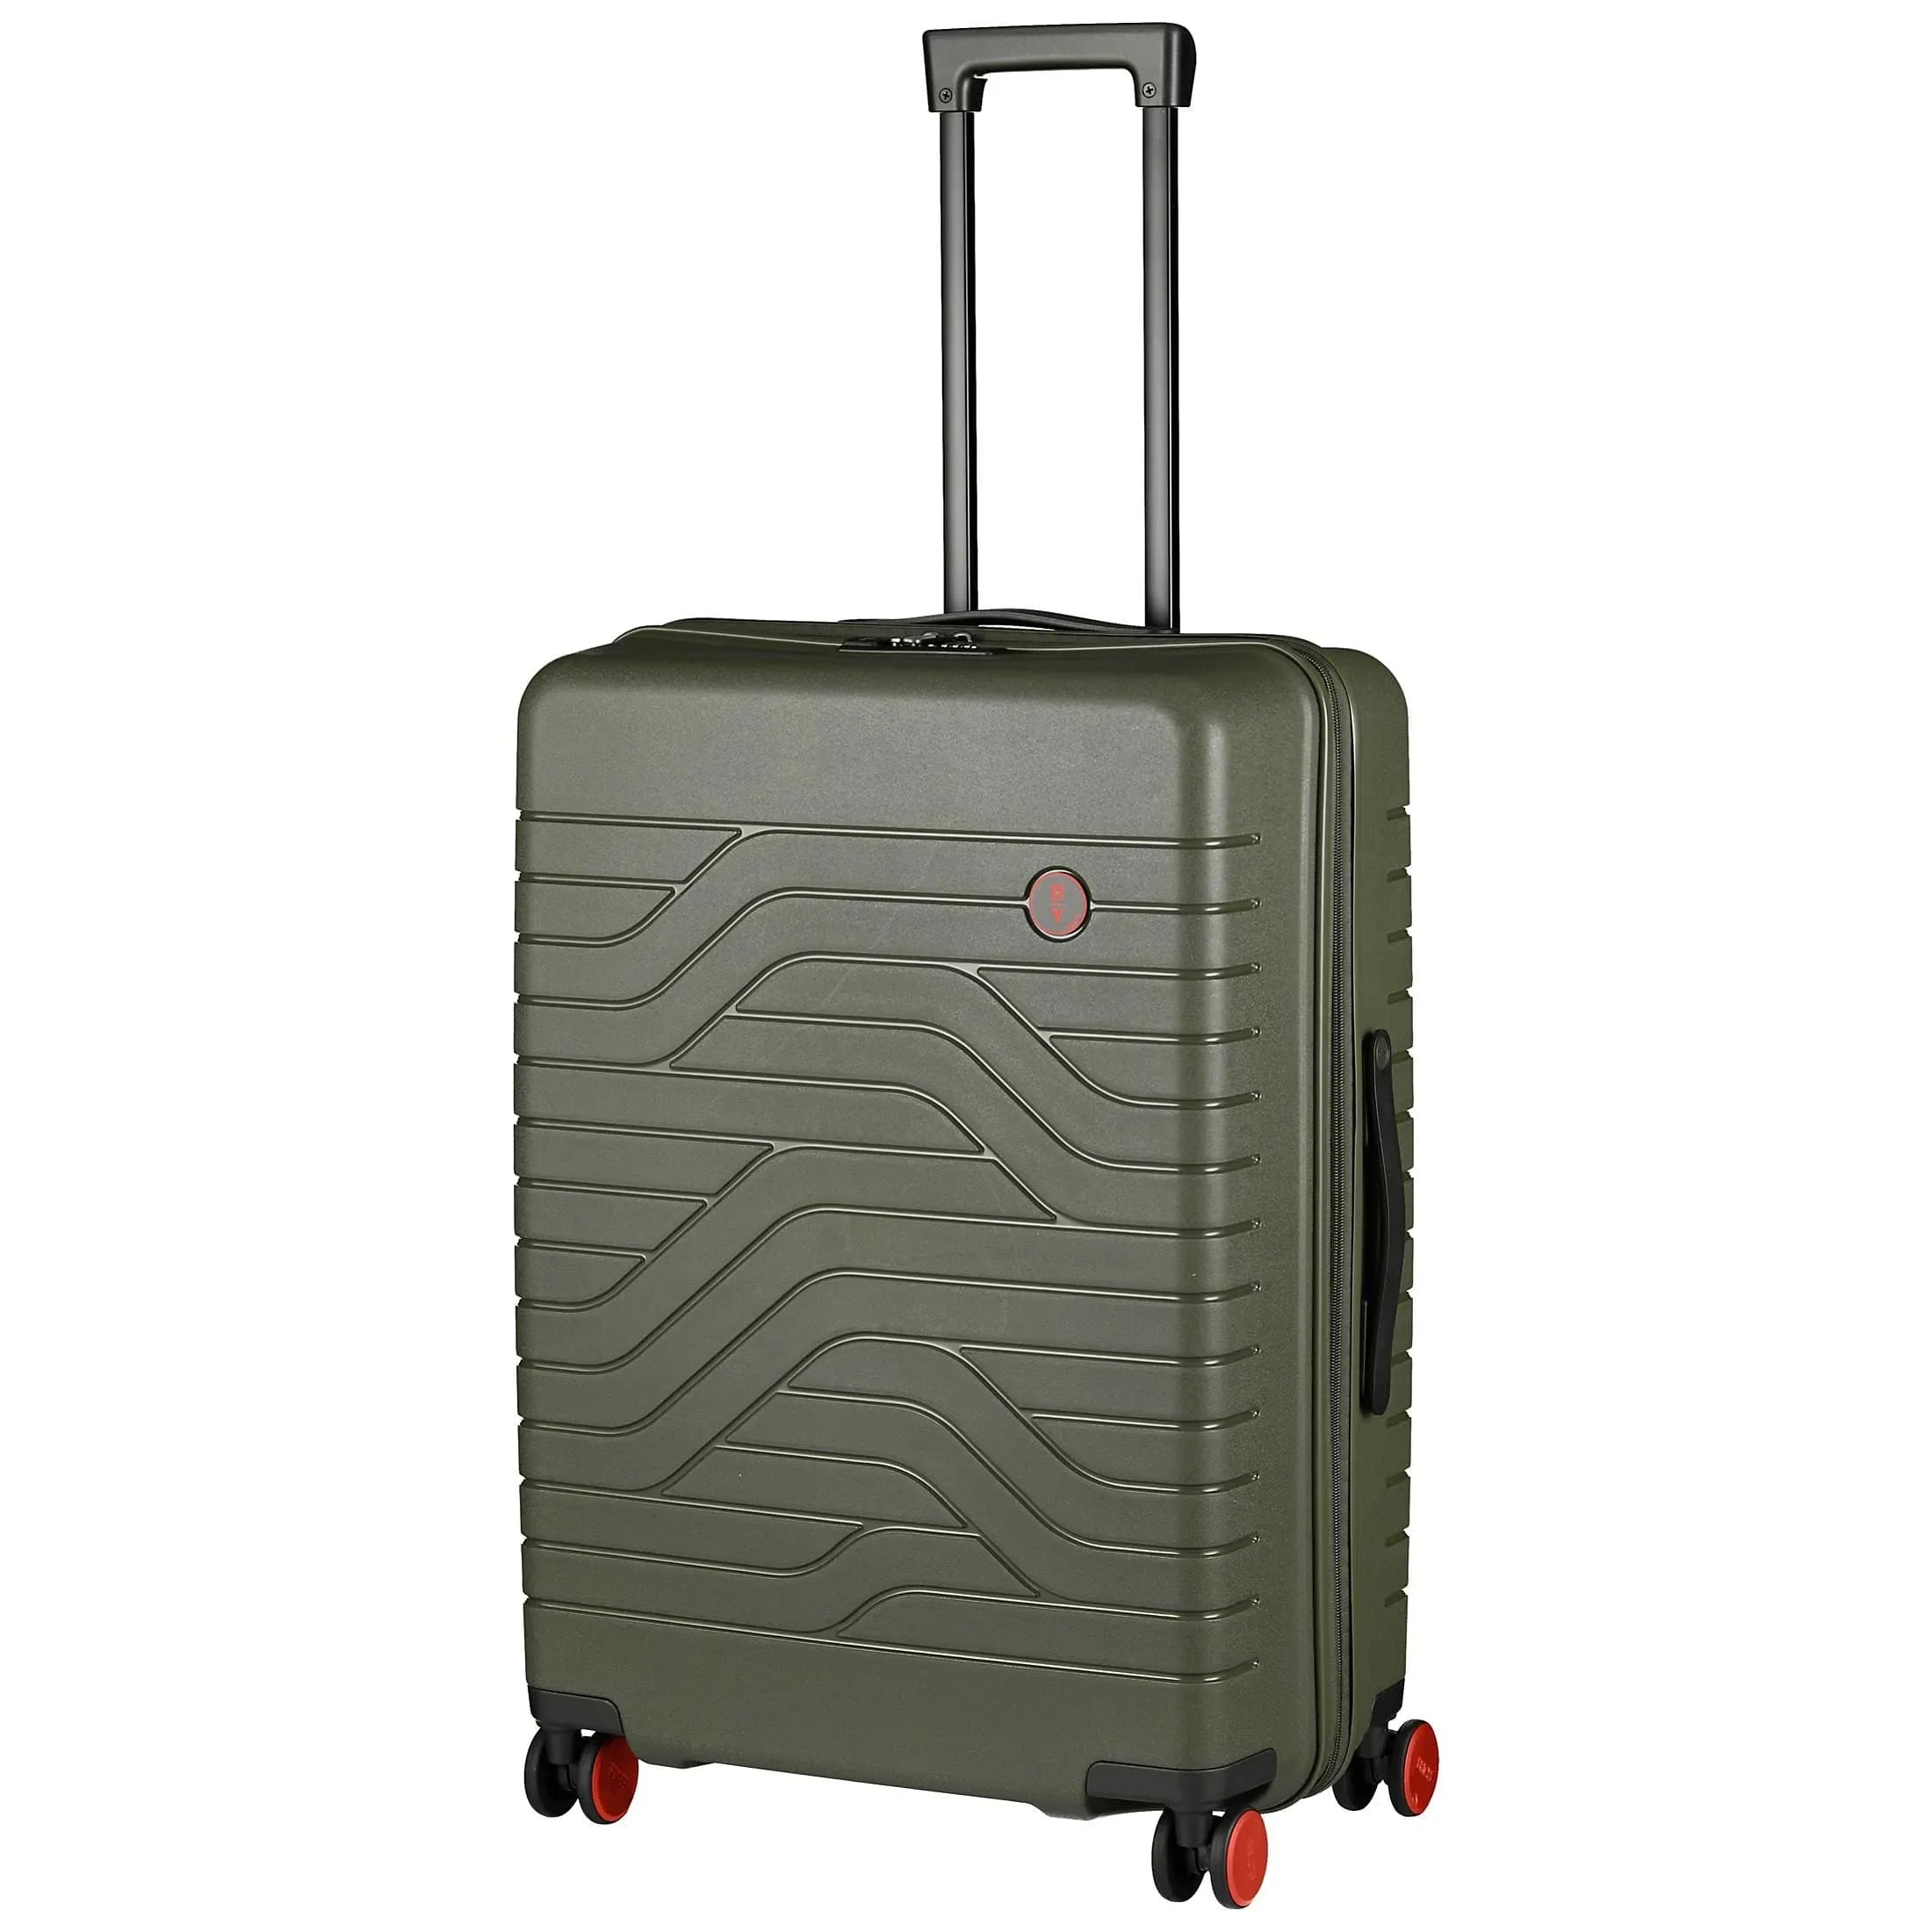 BY by Brics Ulisse 4-Rollen Trolley 71 cm - olive